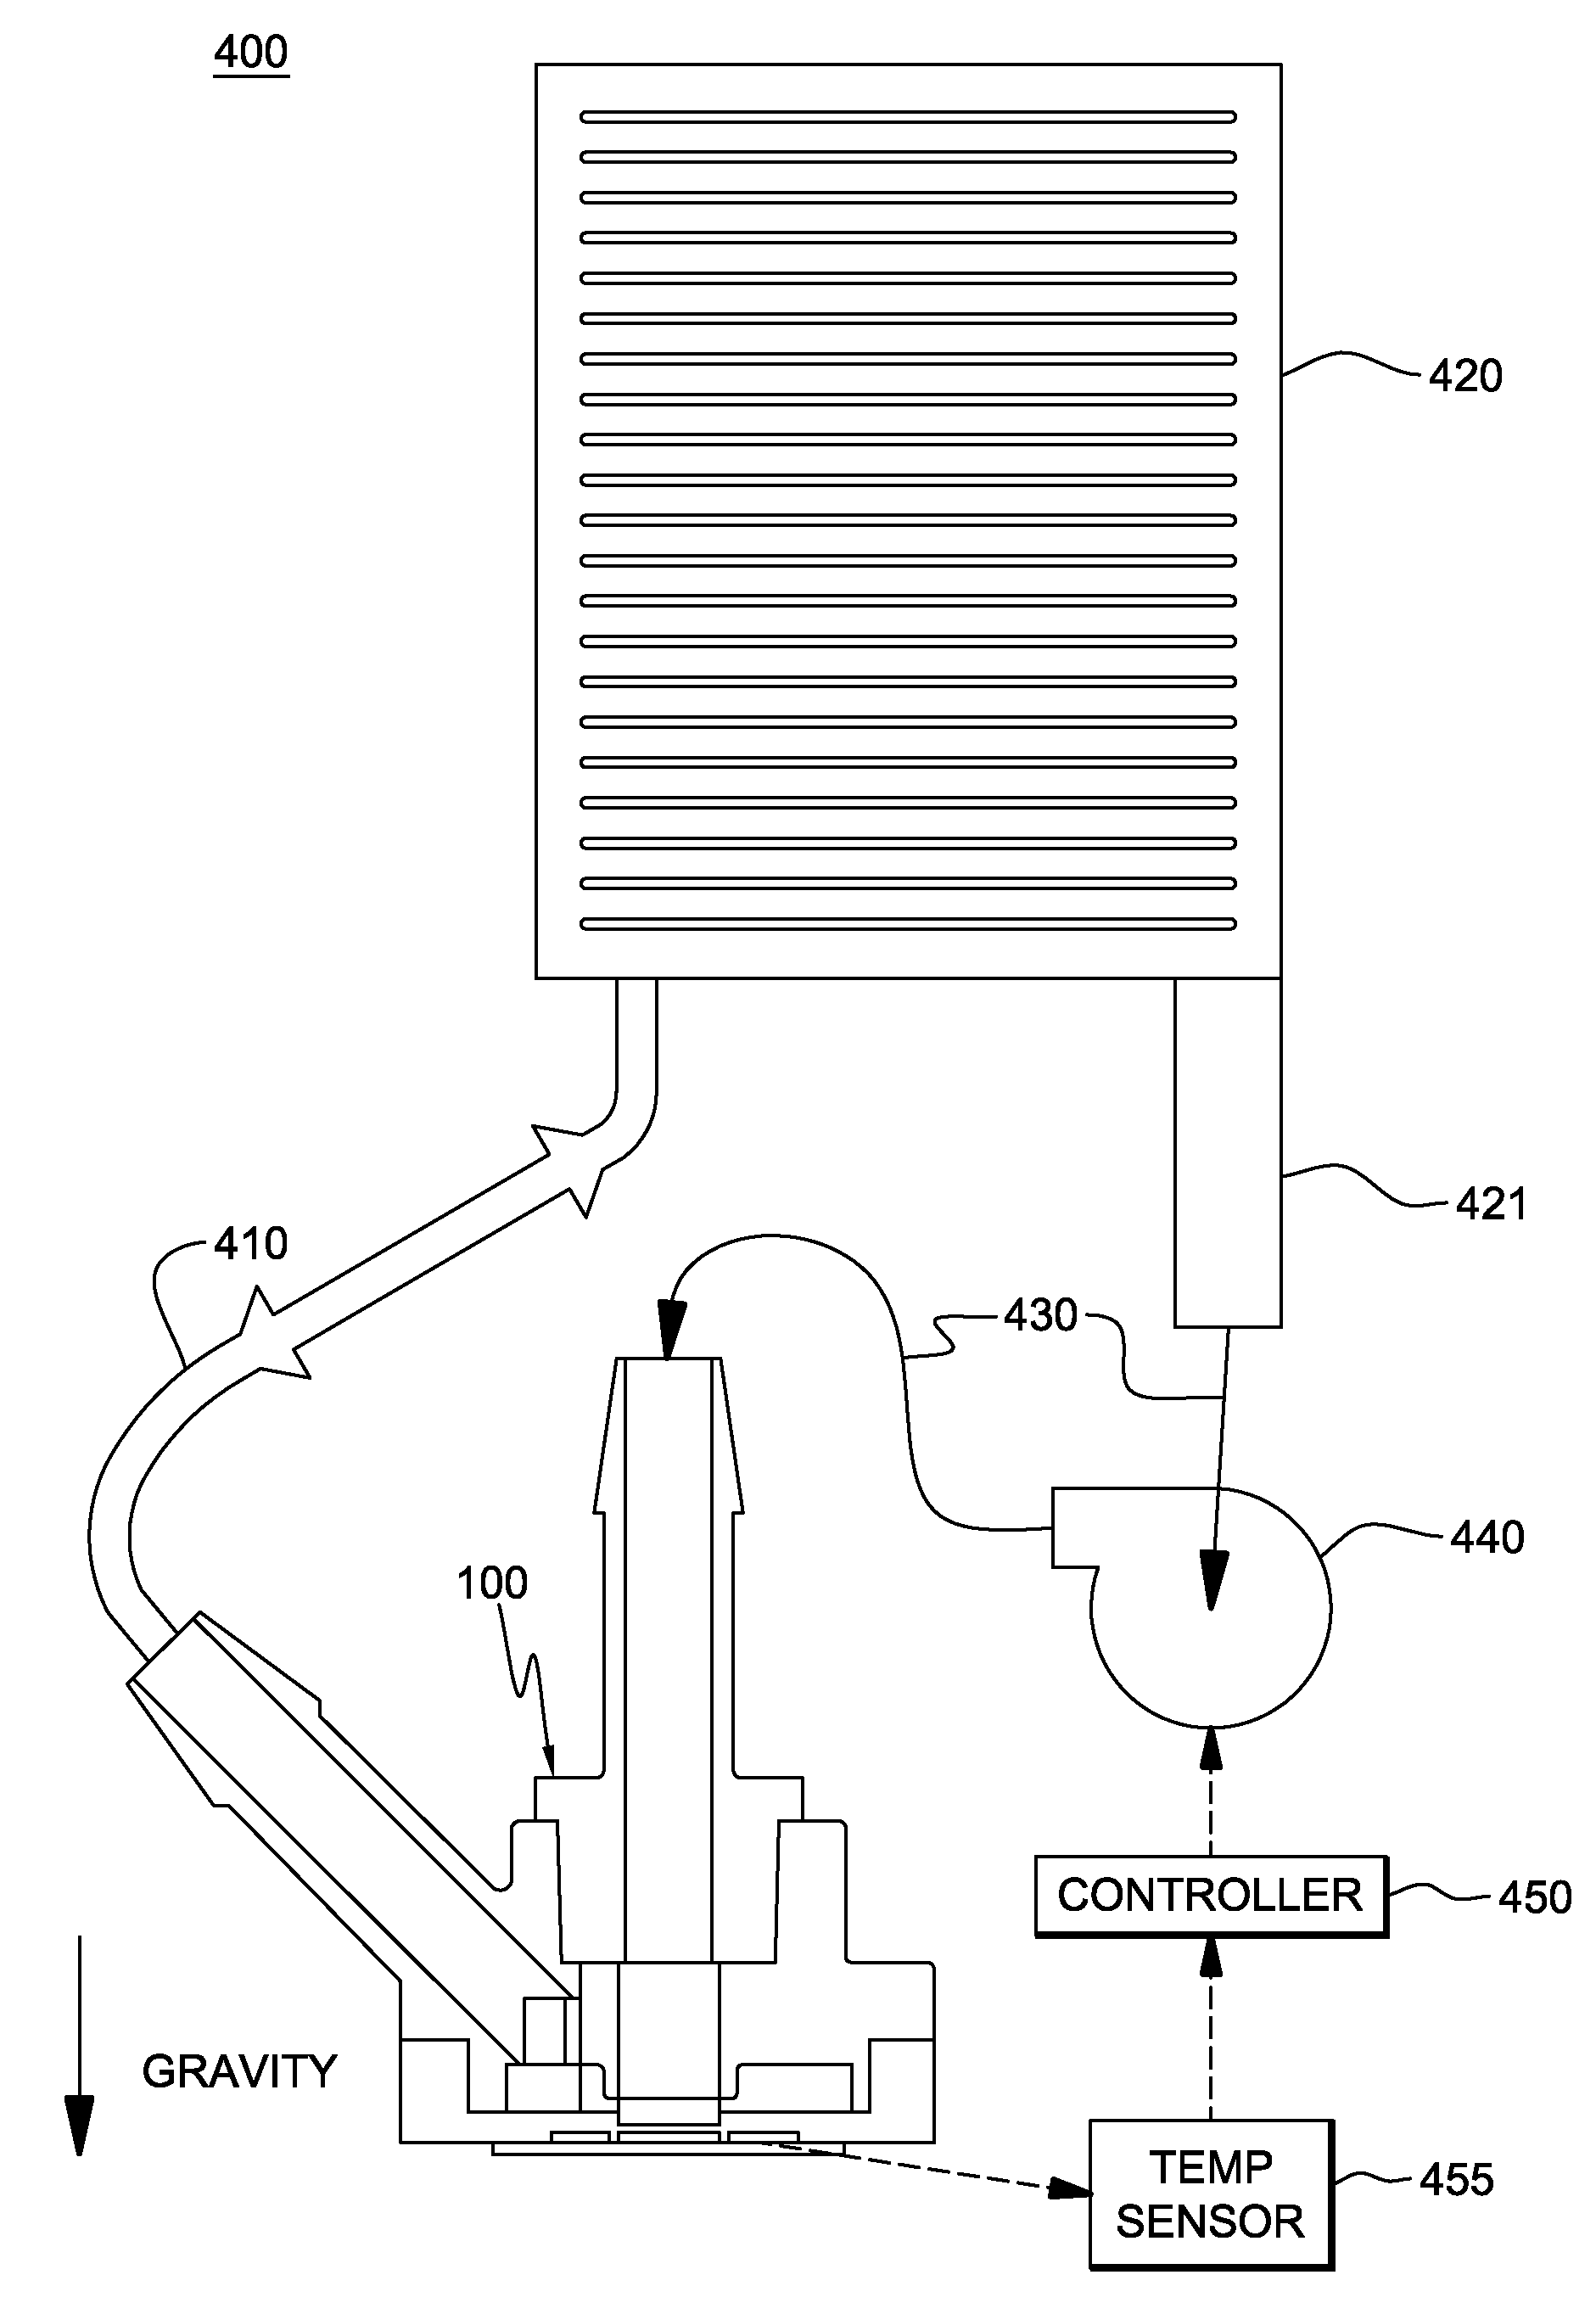 Direct jet impingement-assisted thermosyphon cooling apparatus and method